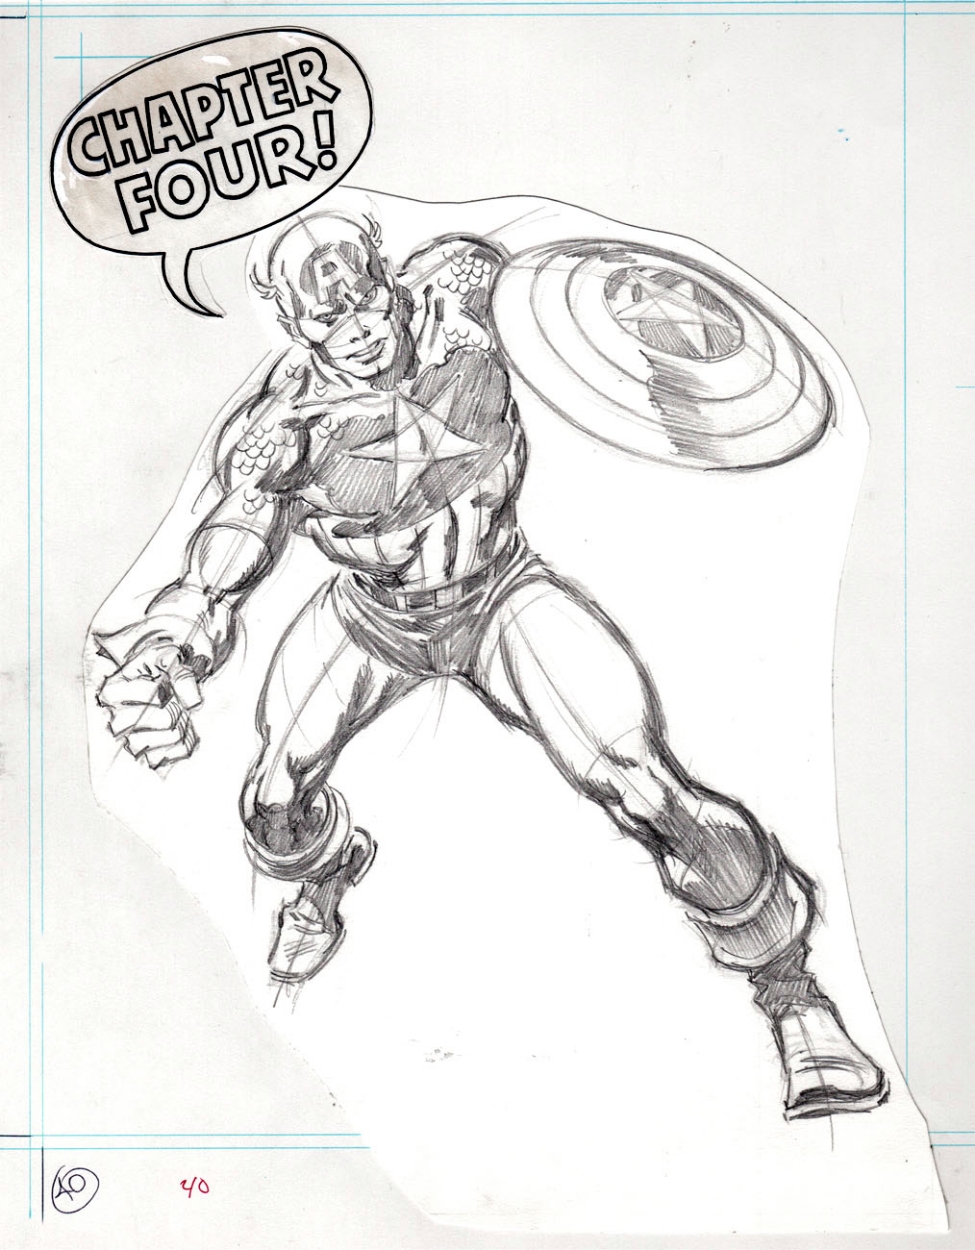 How To Draw Comics The Marvel Way - Chapter 4 - Let's Study - The Figure!,  in Brian Peck's How to Draw Comics the Marvel Way Comic Art Gallery Room